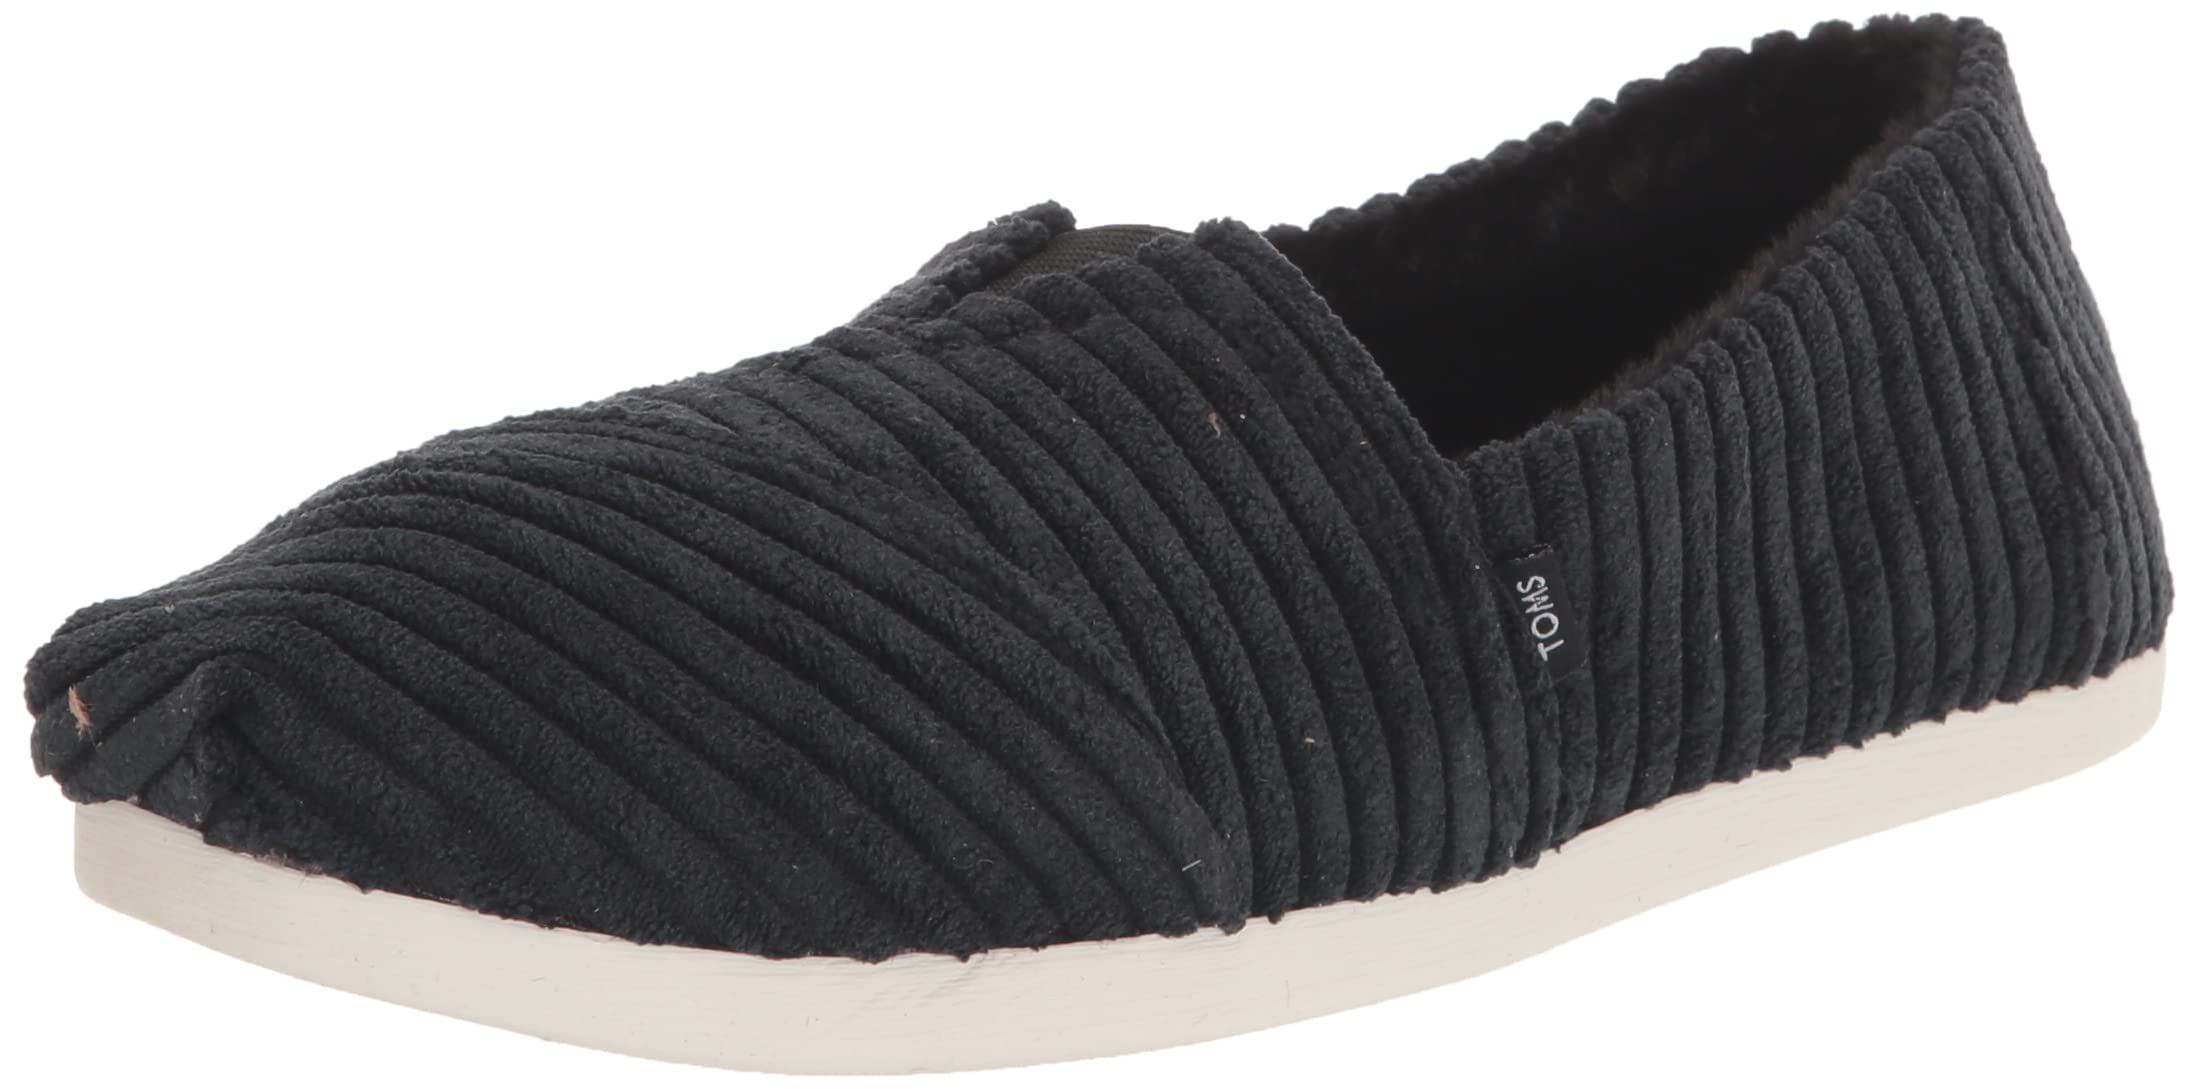 TOMS Women's Alpargata Recycled Cotton Canvas” Loafer Flat, Black, 7